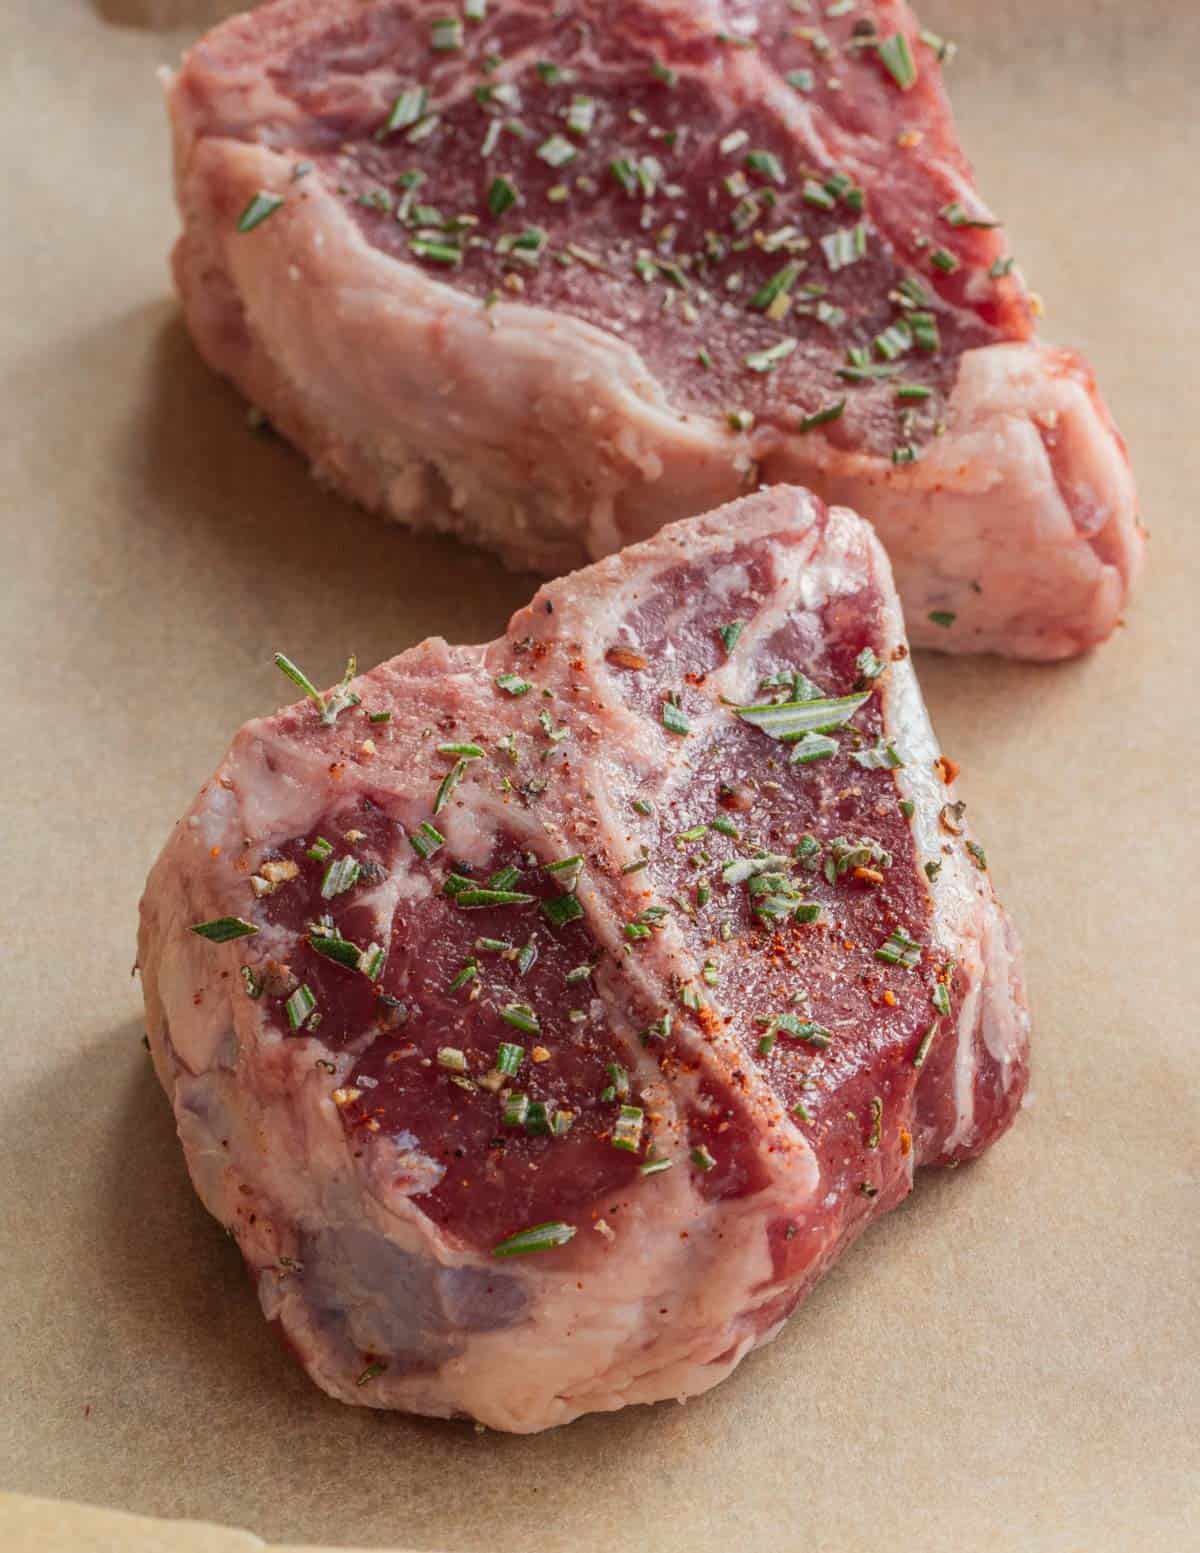 Lamb loin chops seasoned with rosemary on a baking sheet lined with parchment.